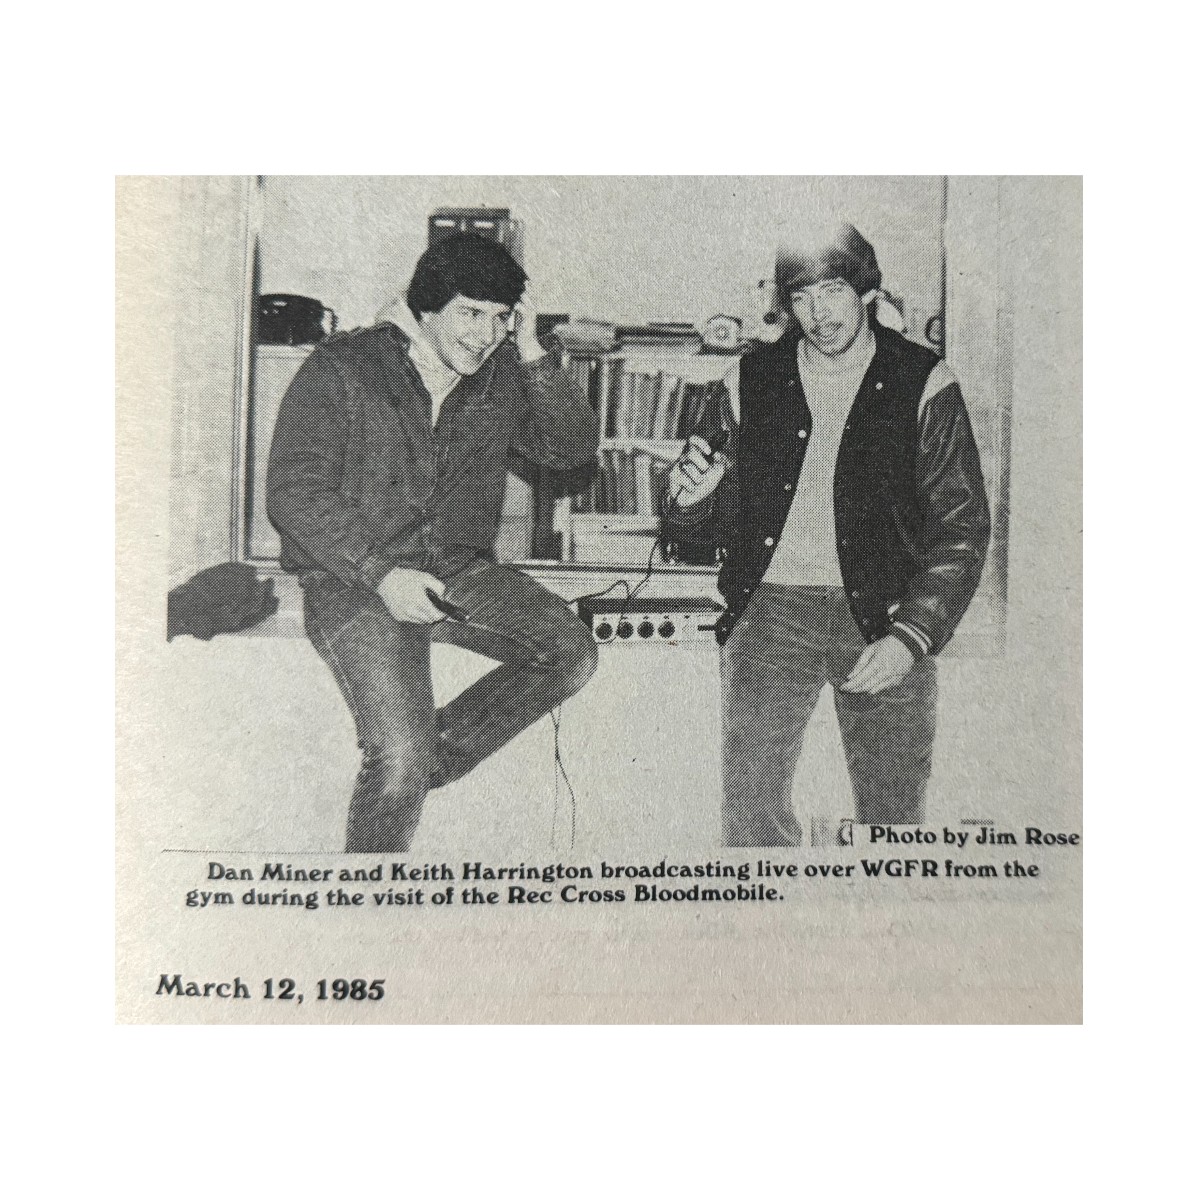 In 1985, friends Dan Miner and Keith Harrington broadcasted live over WGFR. Miner credits SUNY Adirondack for the success of his 41-year career, saying the lessons learned at 'ACC' are still used daily. #throwbackthursday #sunyadk #greatfuturesstarthere #community